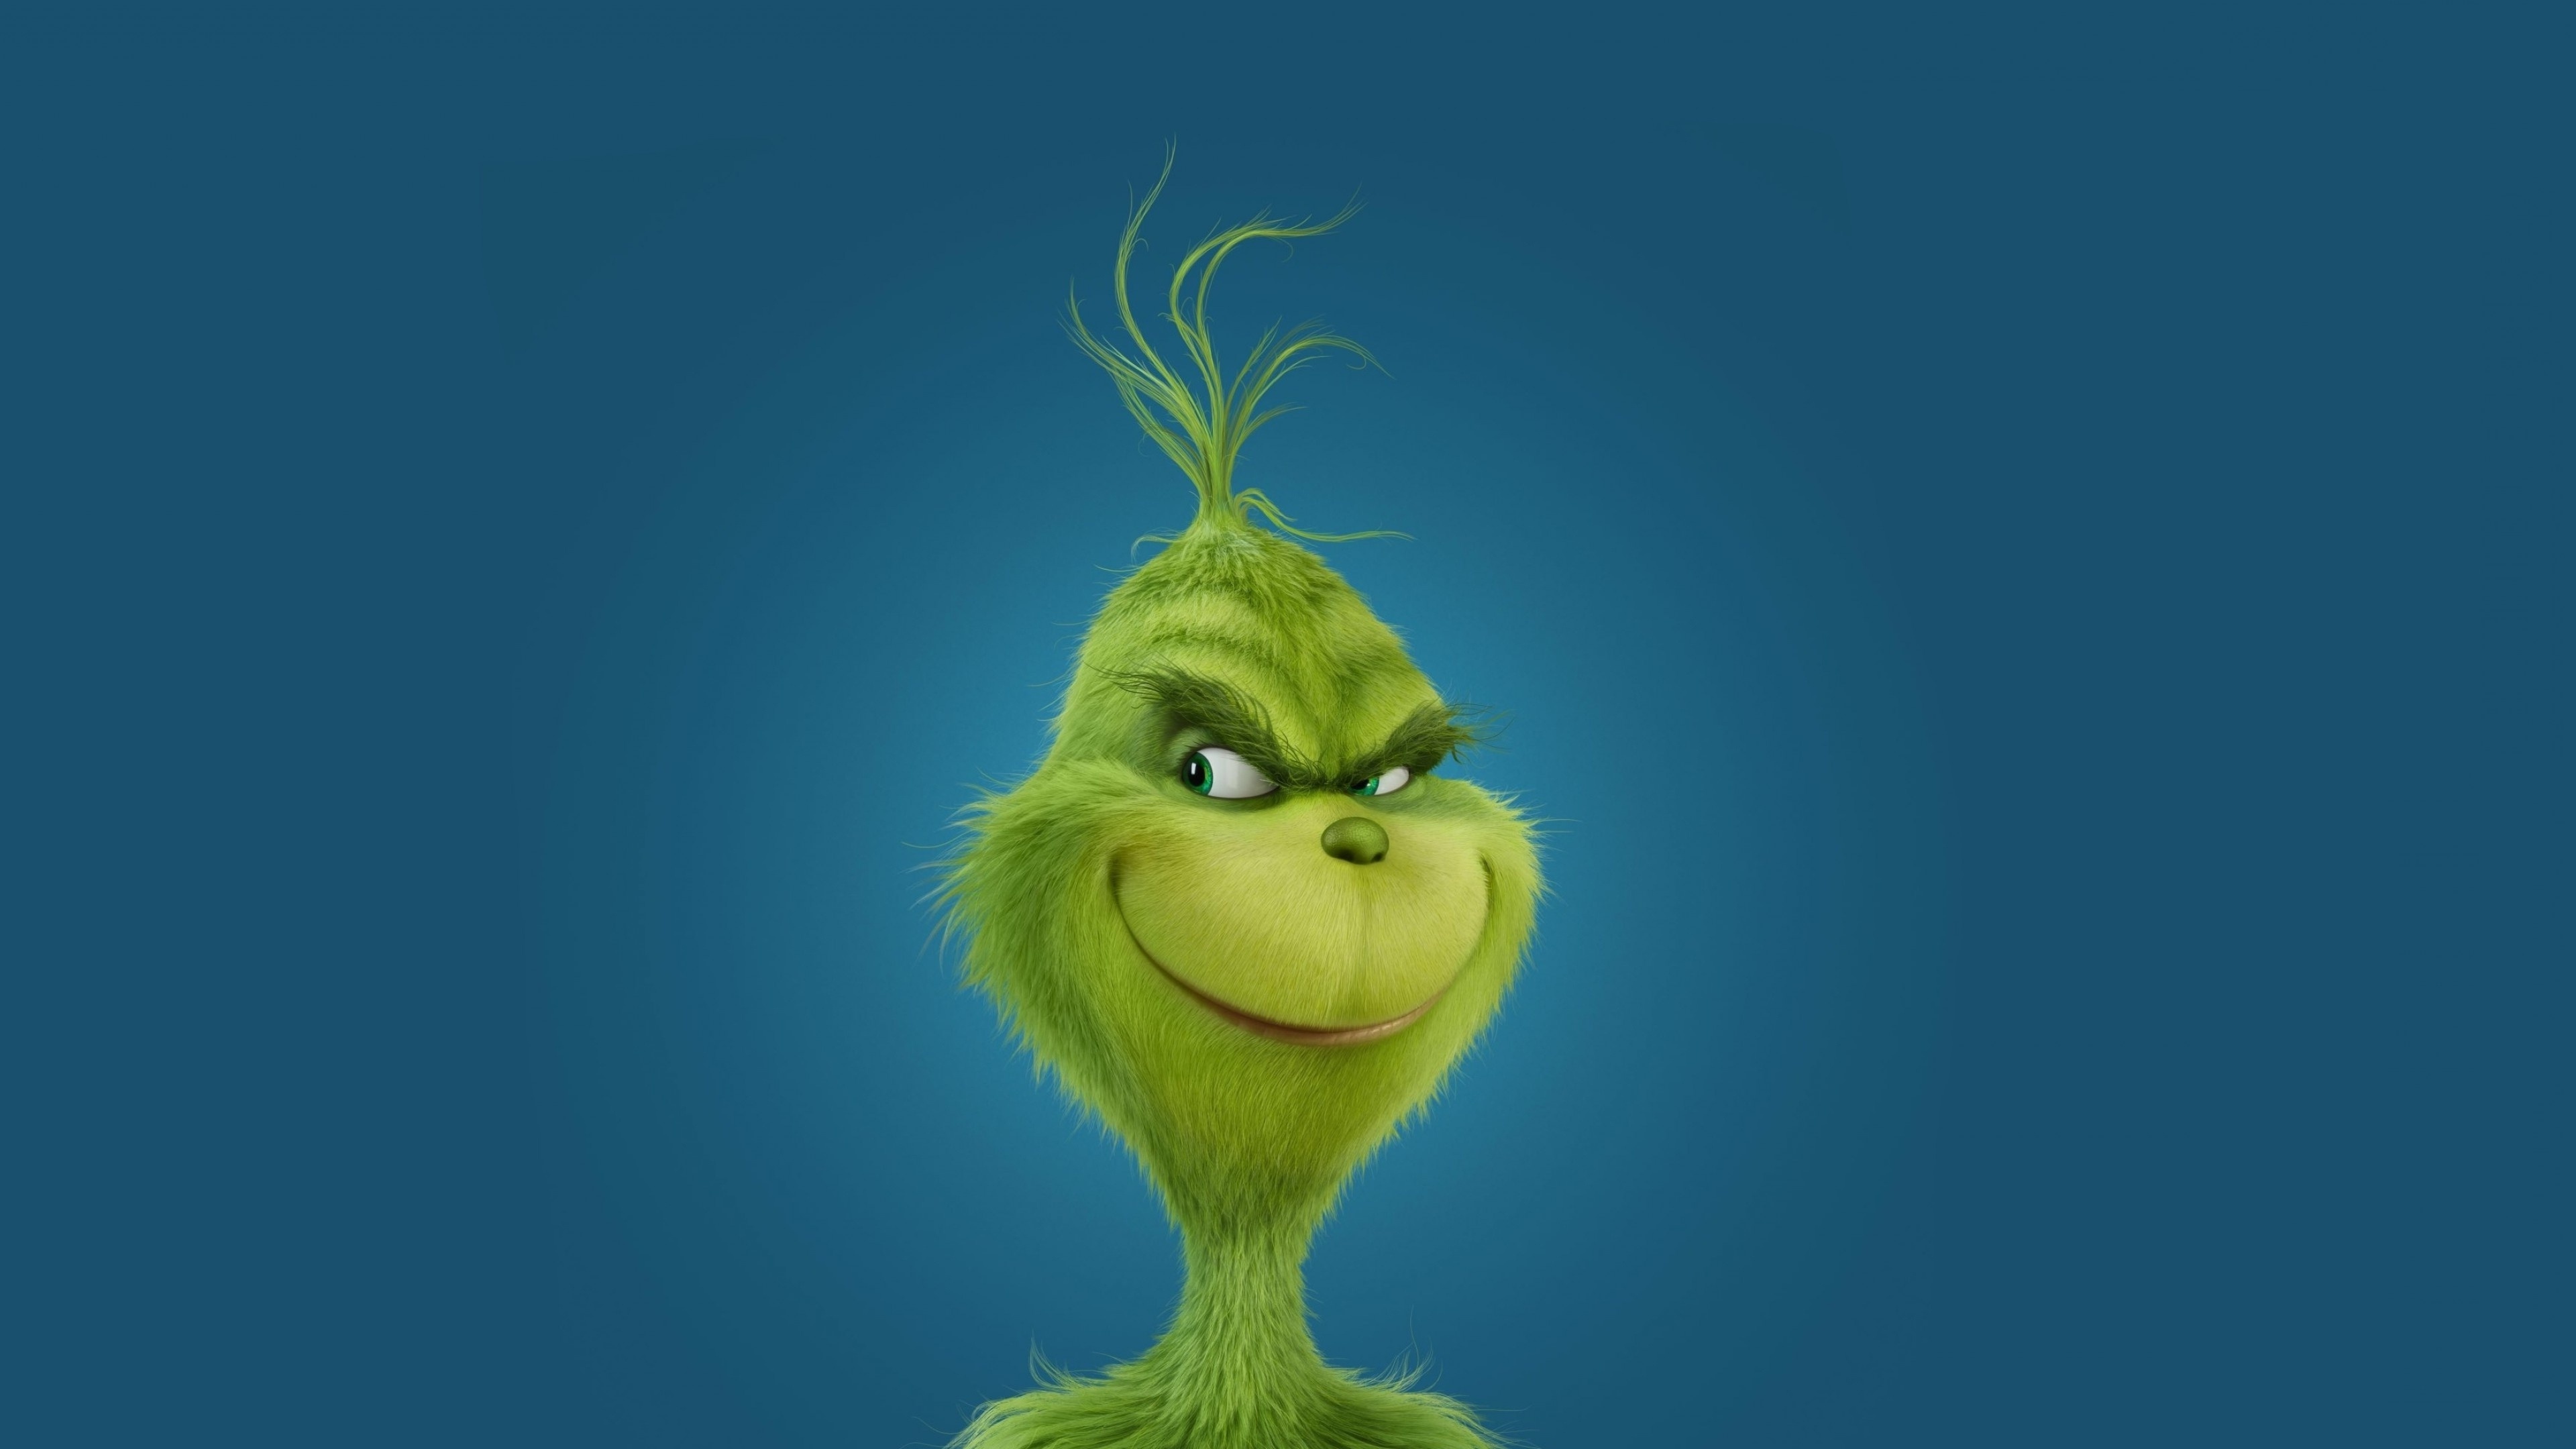 Jim Carrey's Grinch wallpaper, Animated adaptation, High resolution, Personalize your screen, 3840x2160 4K Desktop